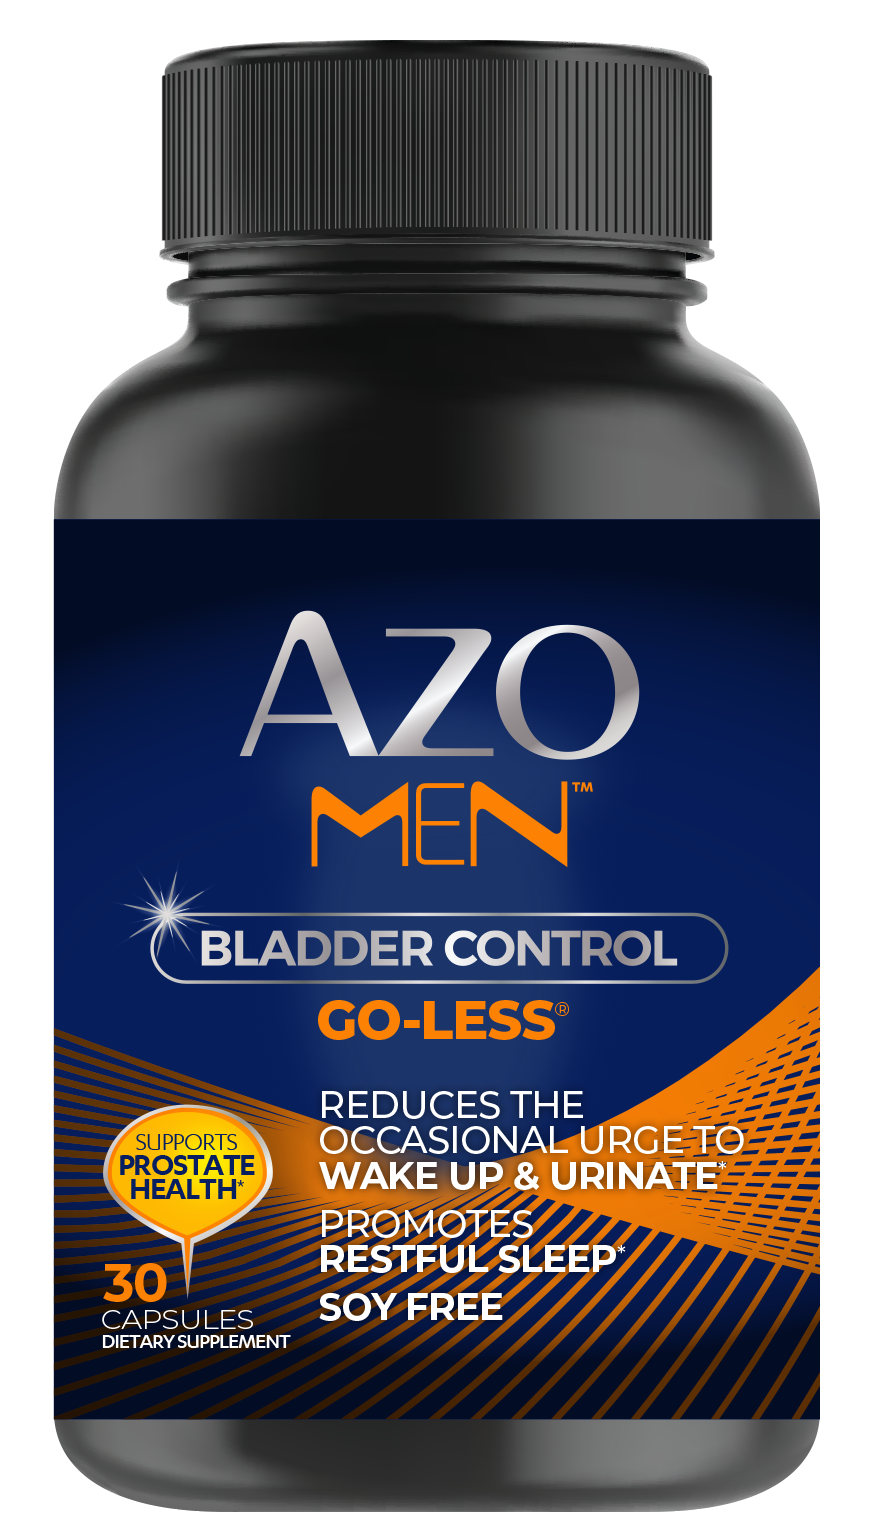 AZO MENTM Bladder Control with Go-Less® MEN front of Package